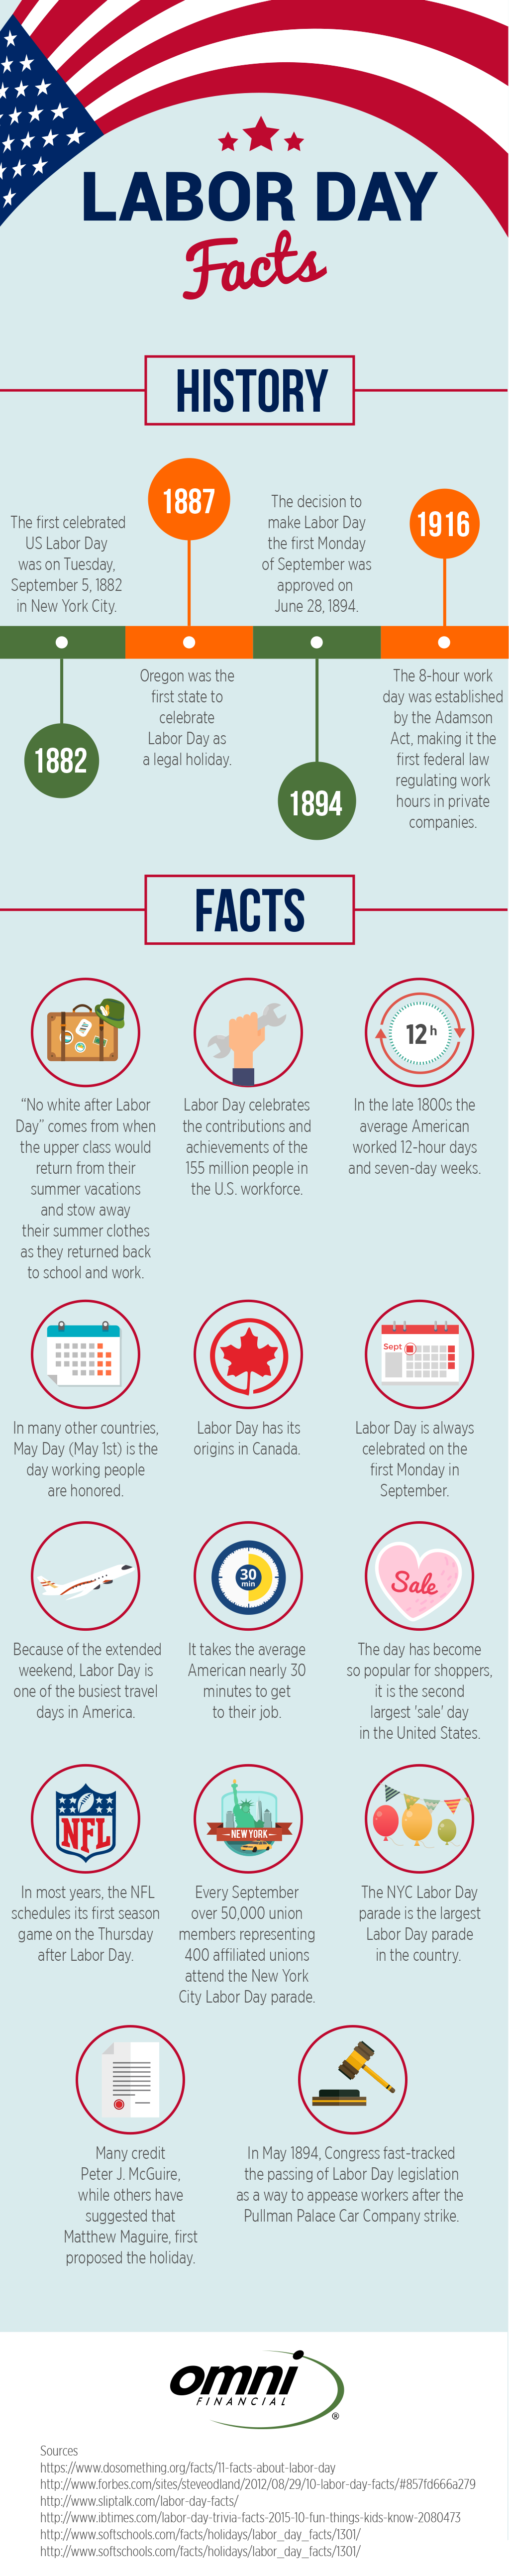 Labor Day Facts - Omni Military Loans®